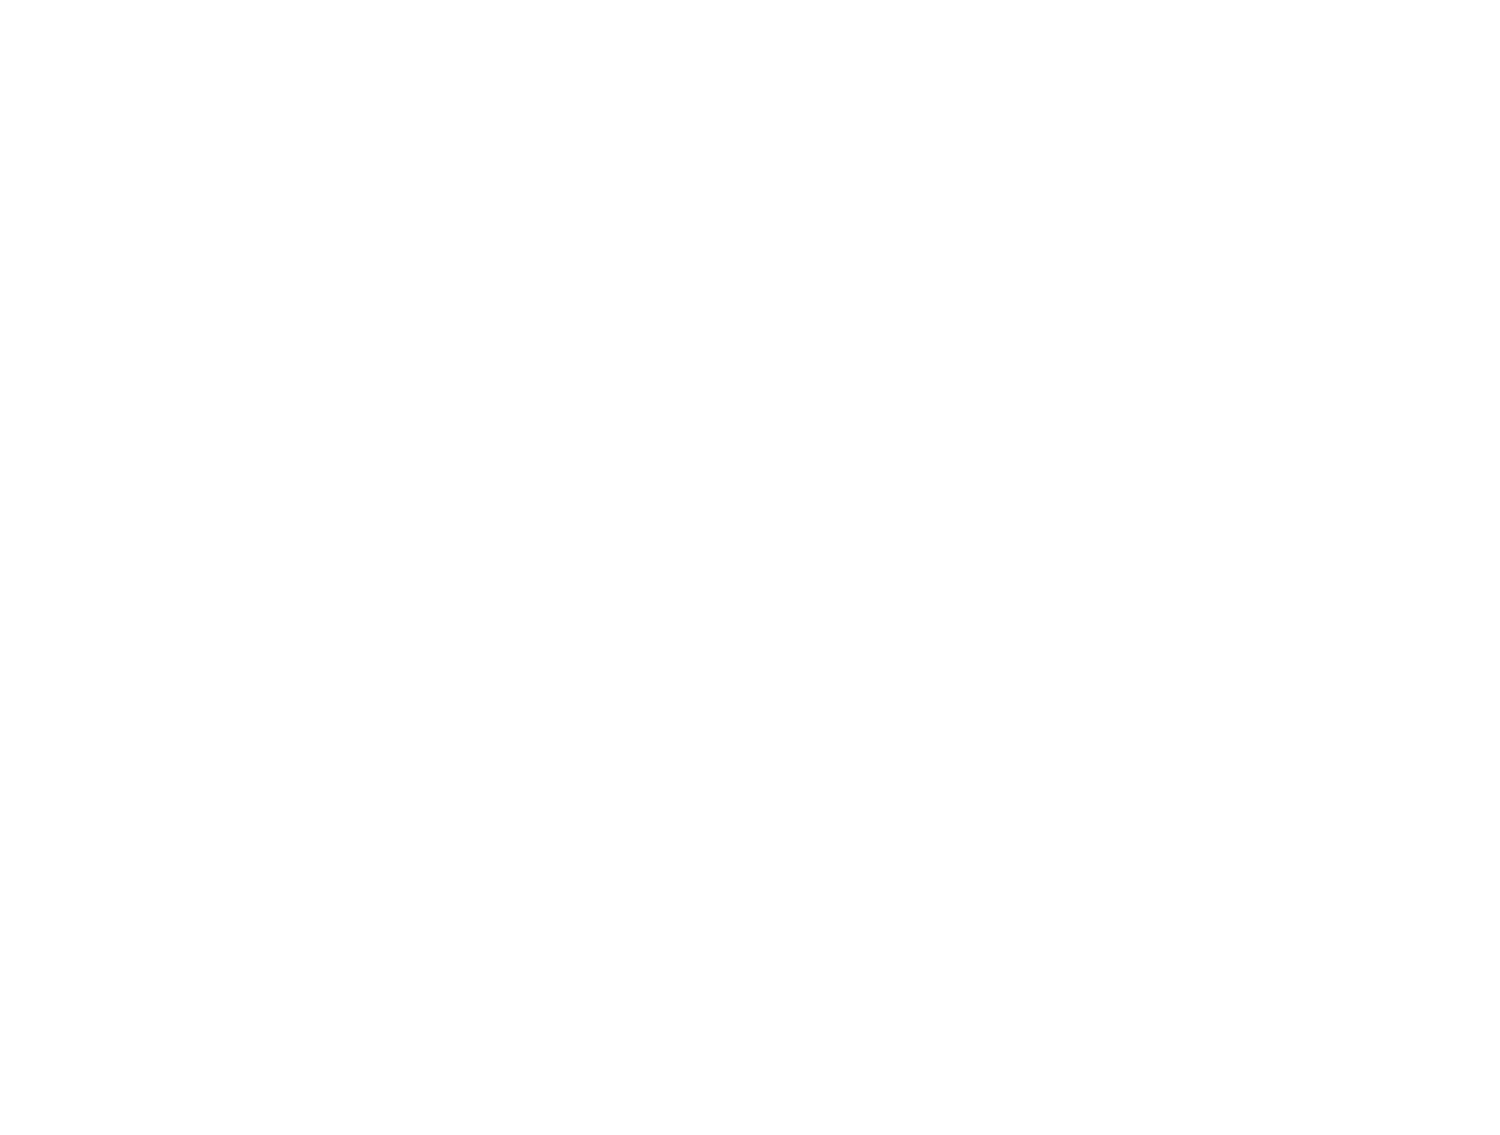 Campbell Station